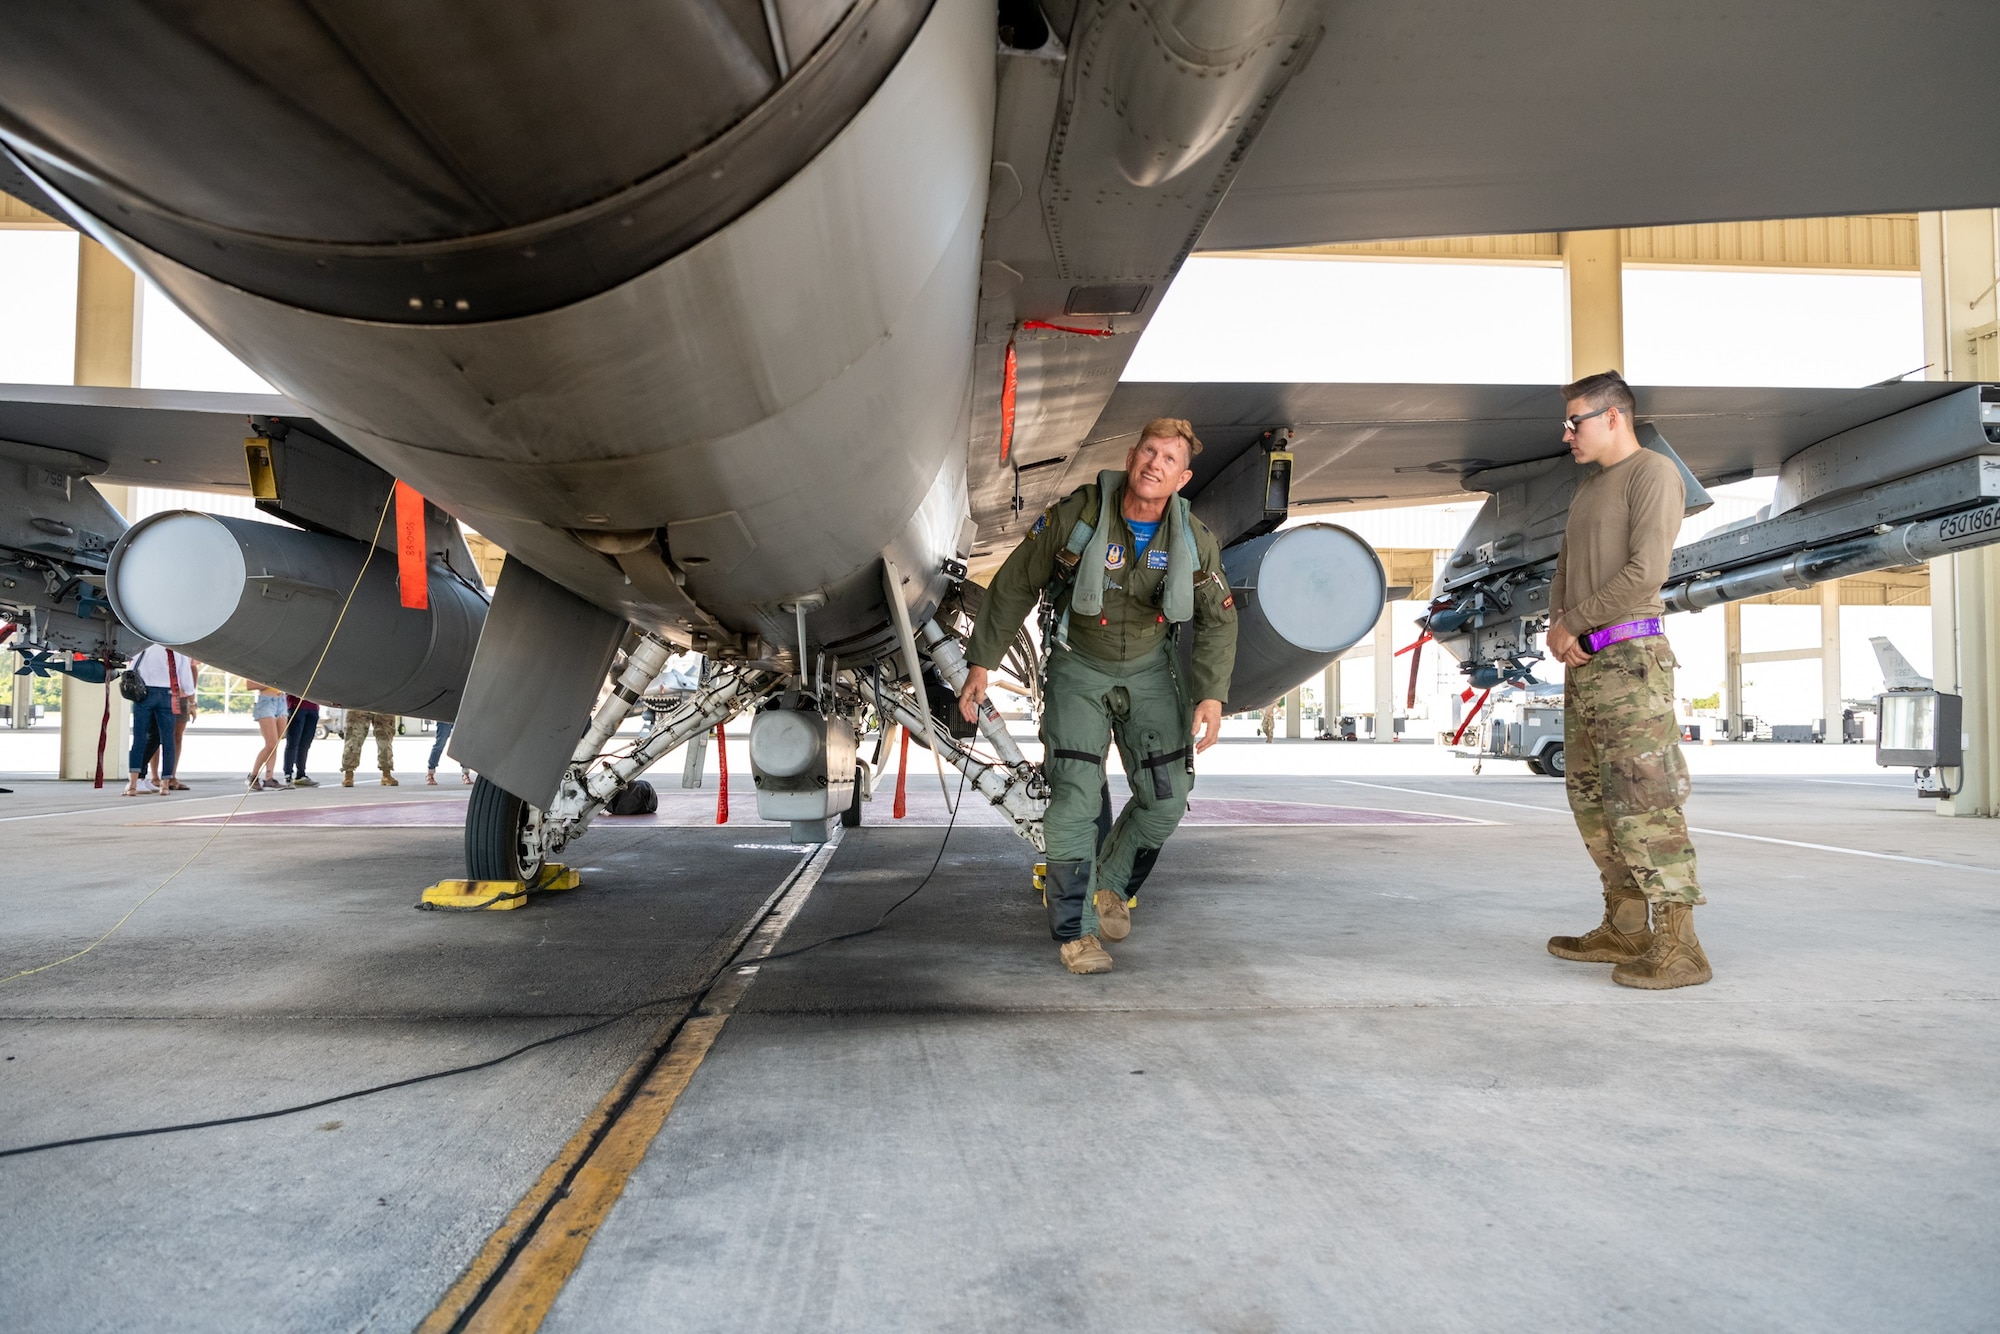 Lt. Col Joseph “Hooter” Feheley performs a pre-flight inspection on an F-16 Fighting Falcon prior to his final flight the day of his retirement at Homestead Air Reserve Base, Florida, Dec. 10, 2021. (U.S. Air Force photo by Master Sgt. Allissa Landgraff)